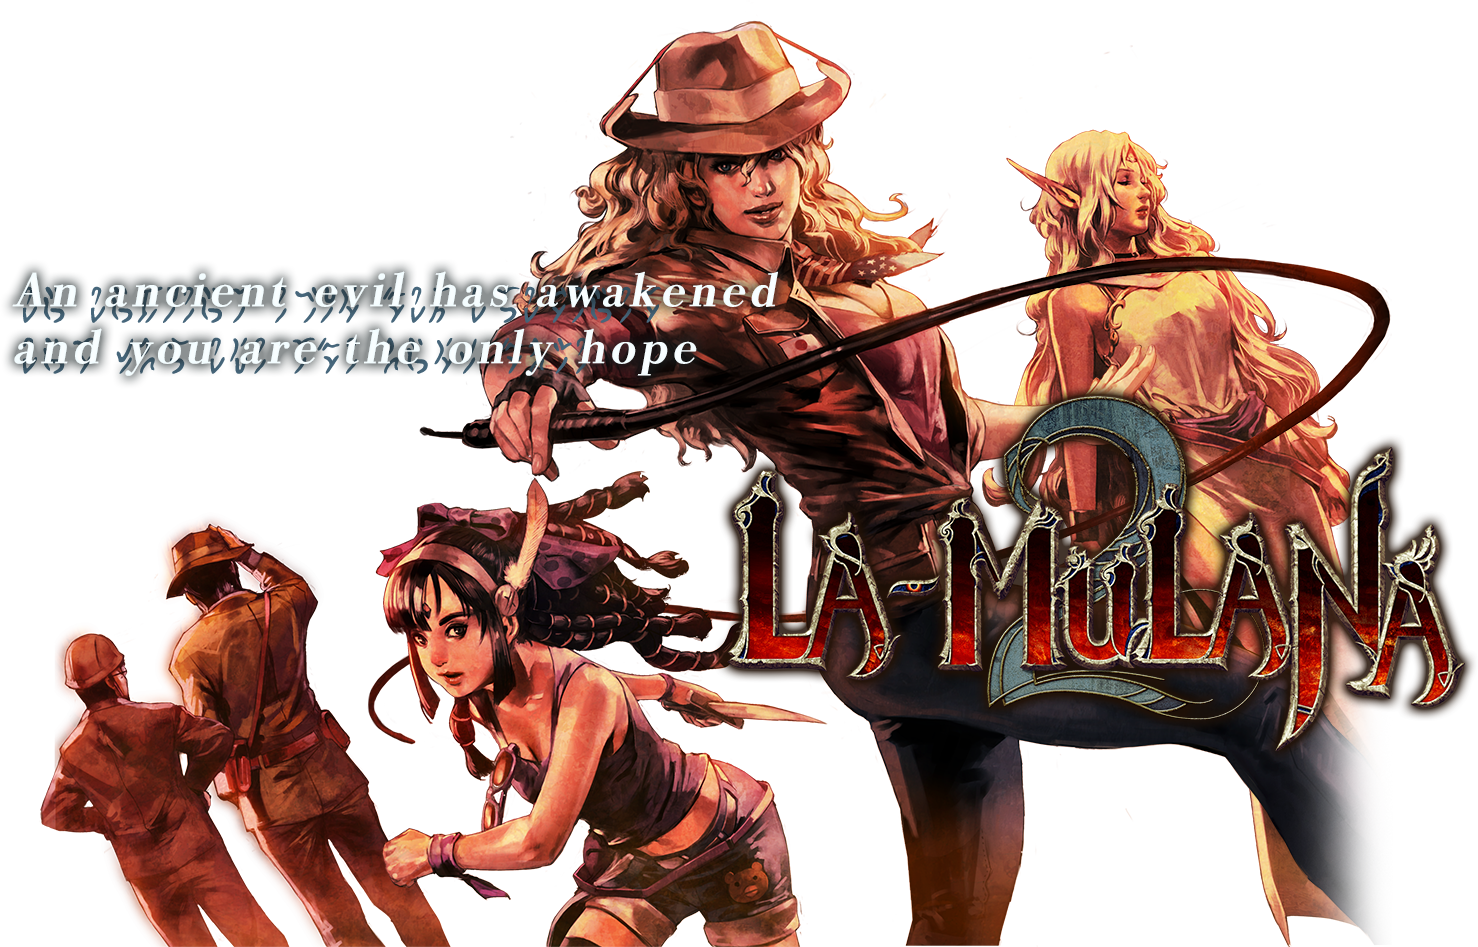 LA-MULANA 2 --An ancient evil has awakened and you are the only hope